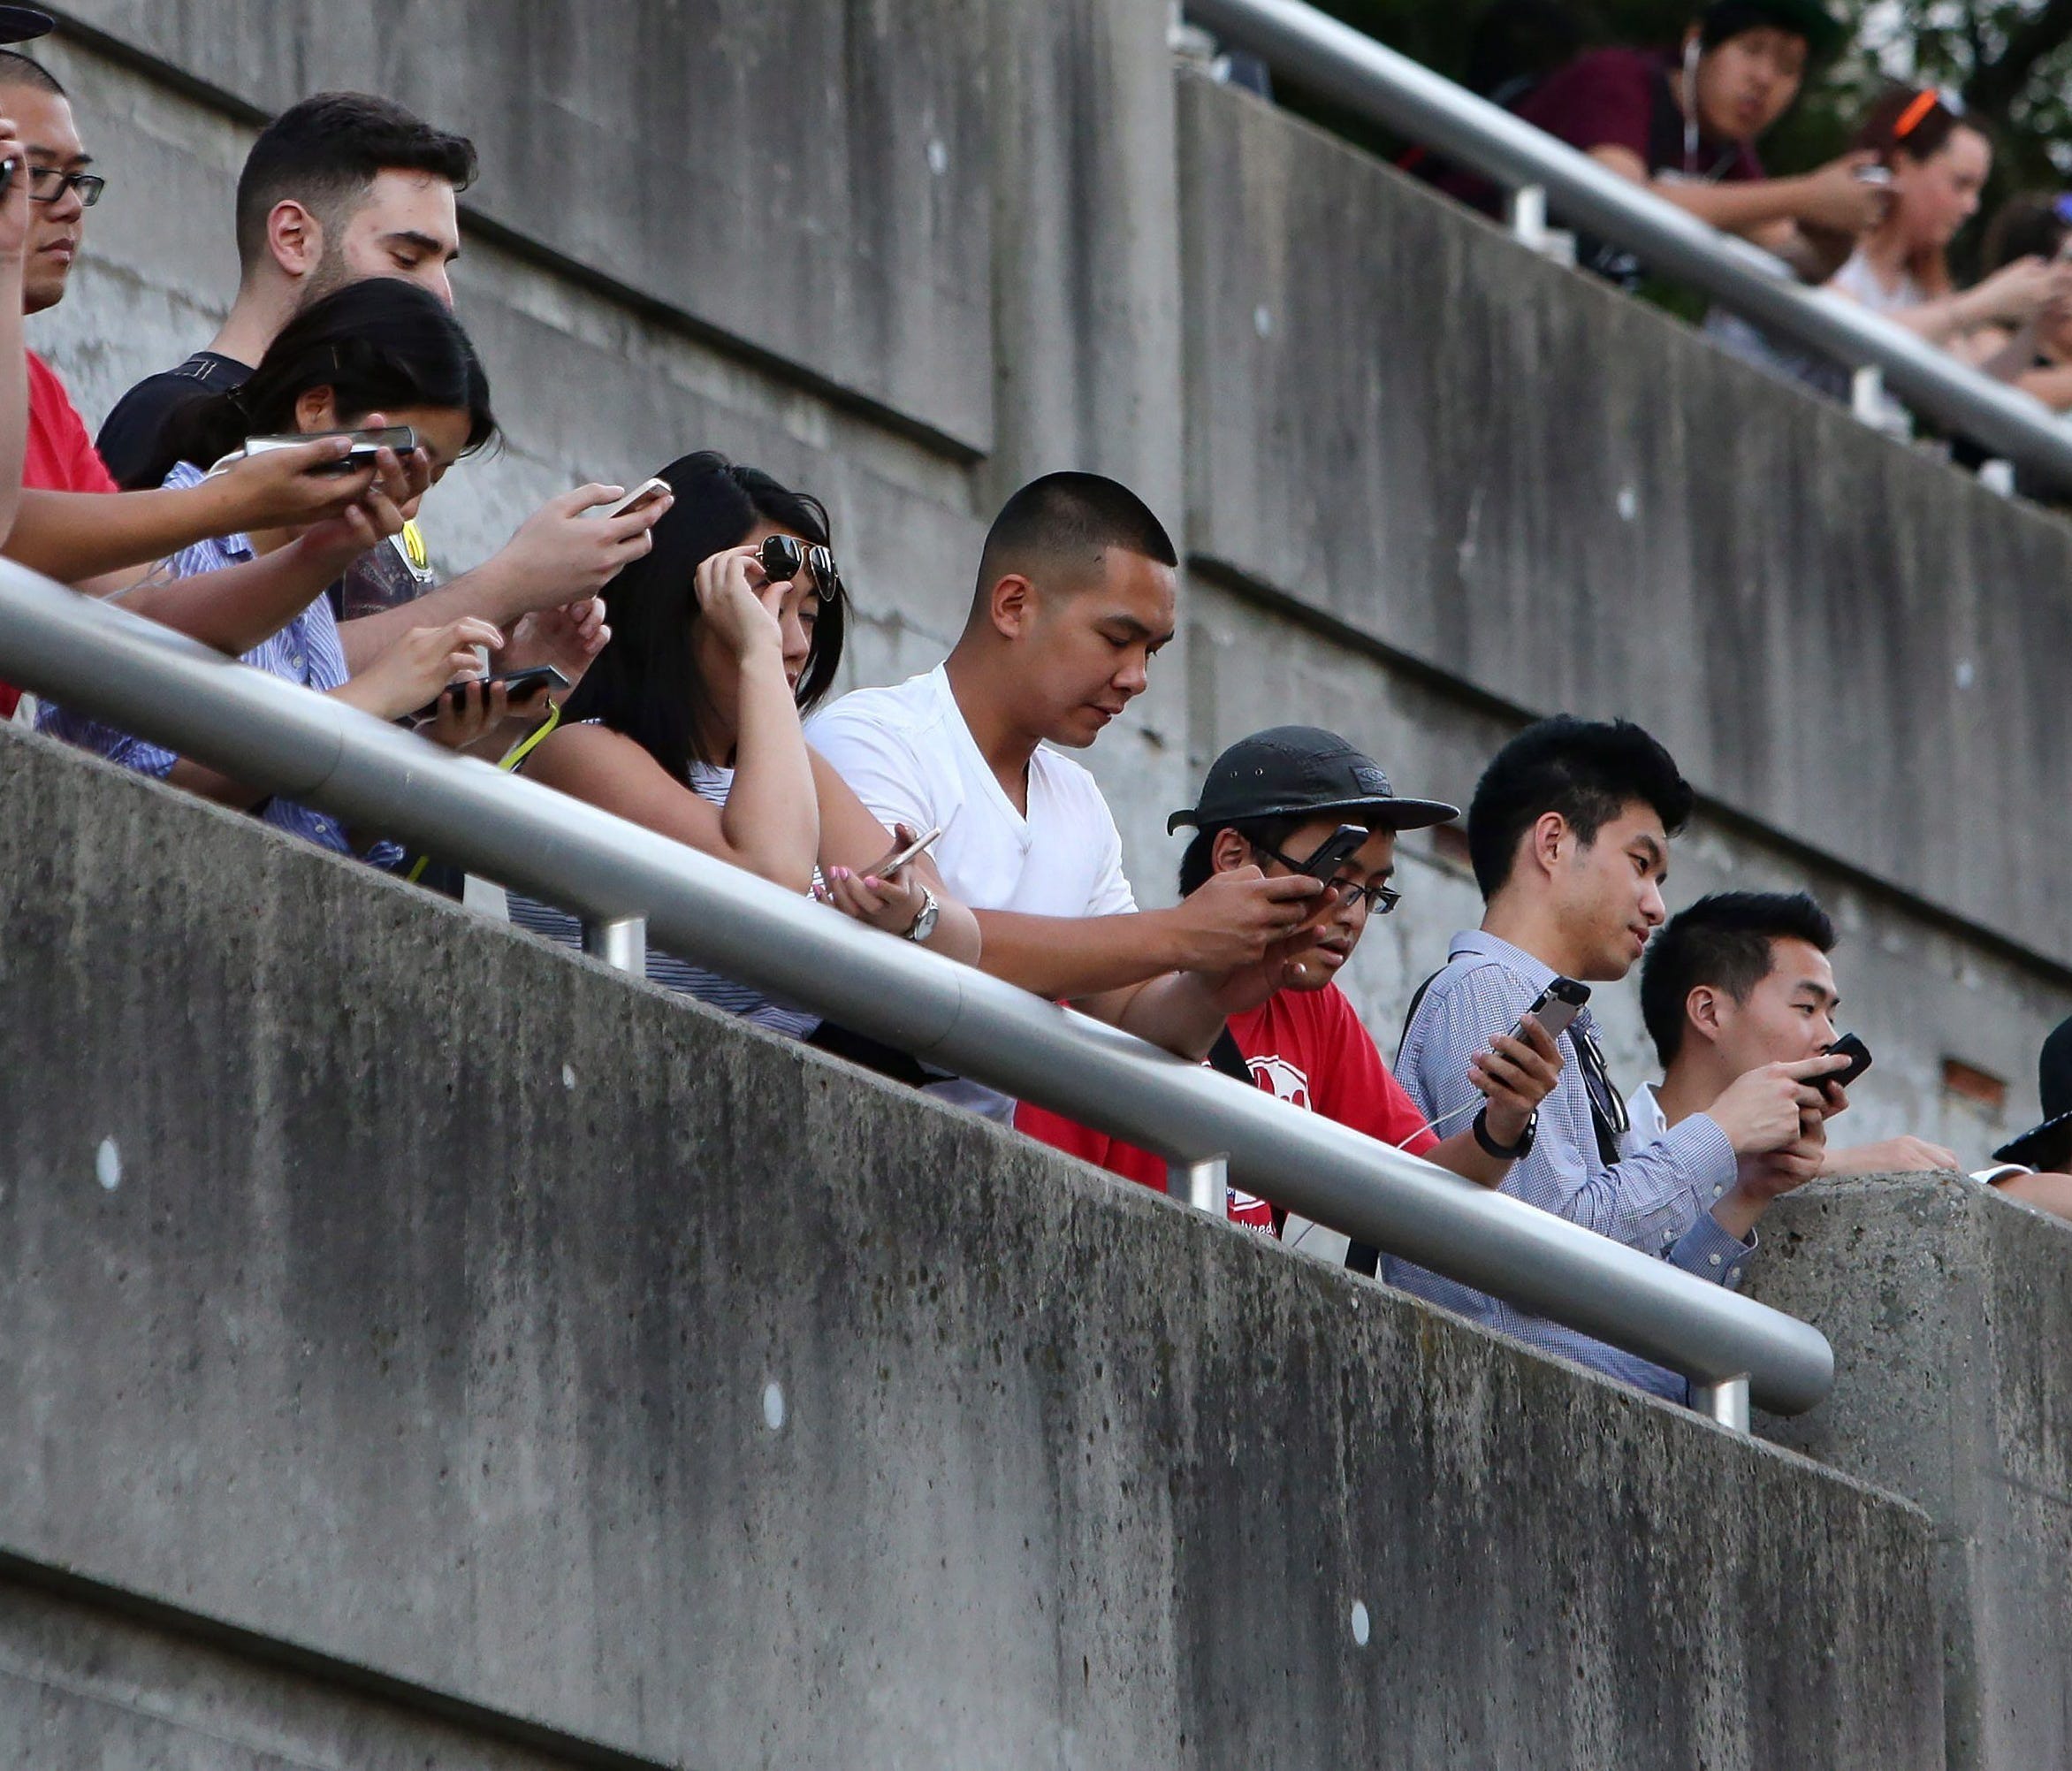 People use their phones in Toronto, Monday, July 18, 2016.